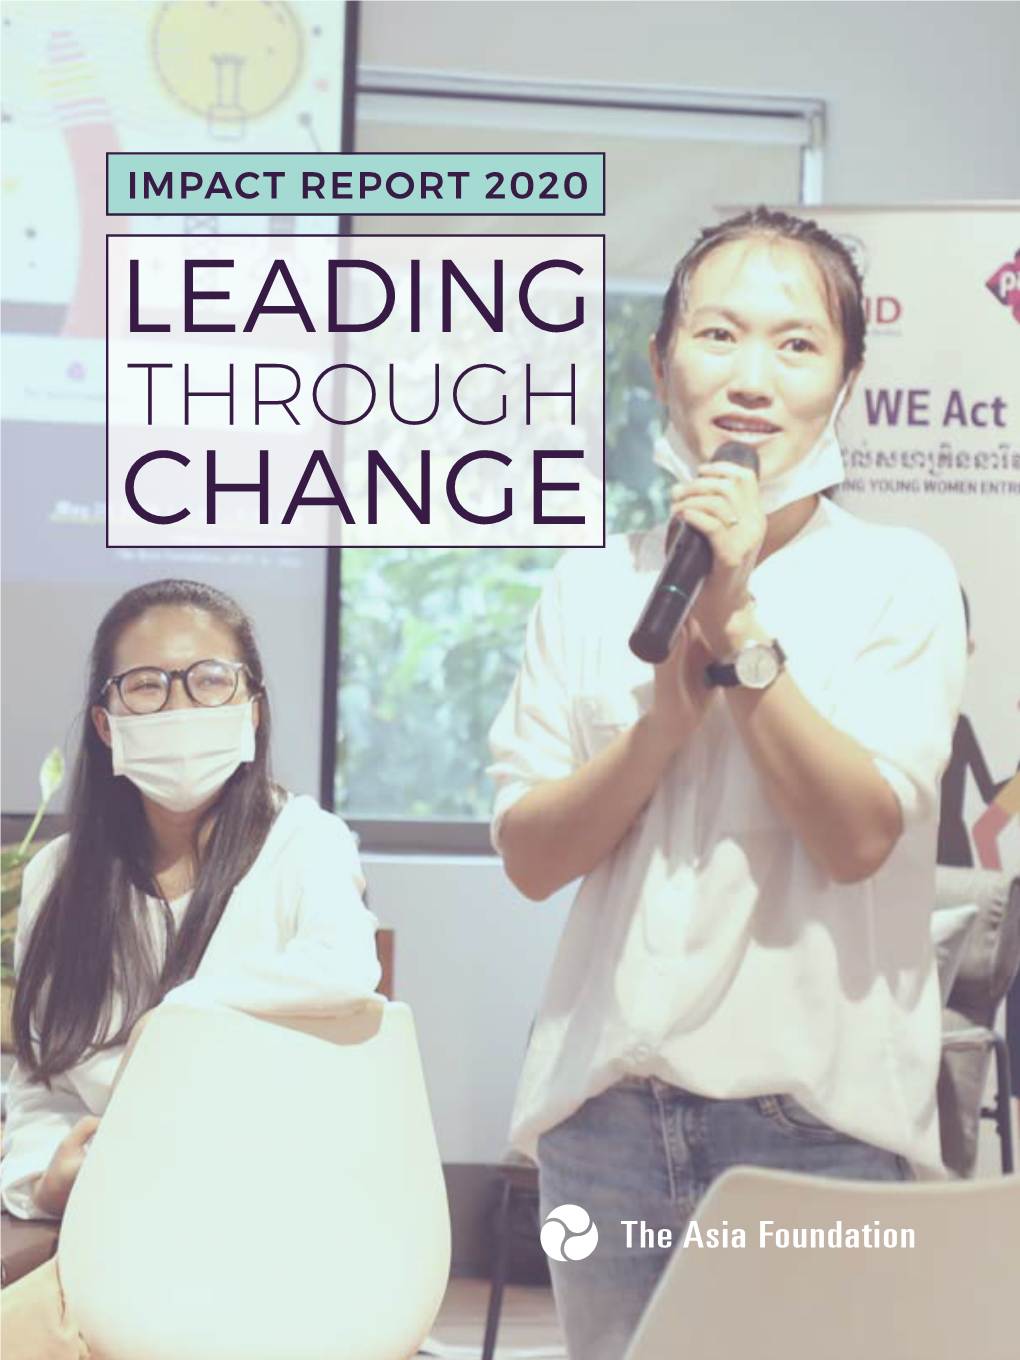 IMPACT REPORT 2020 LEADING THROUGH CHANGE COVER IMAGE: in Cambodia, the Asia Foundation Launched the First-Ever Women in TEK Network(WTN) to Fuel Women Run Start-Ups